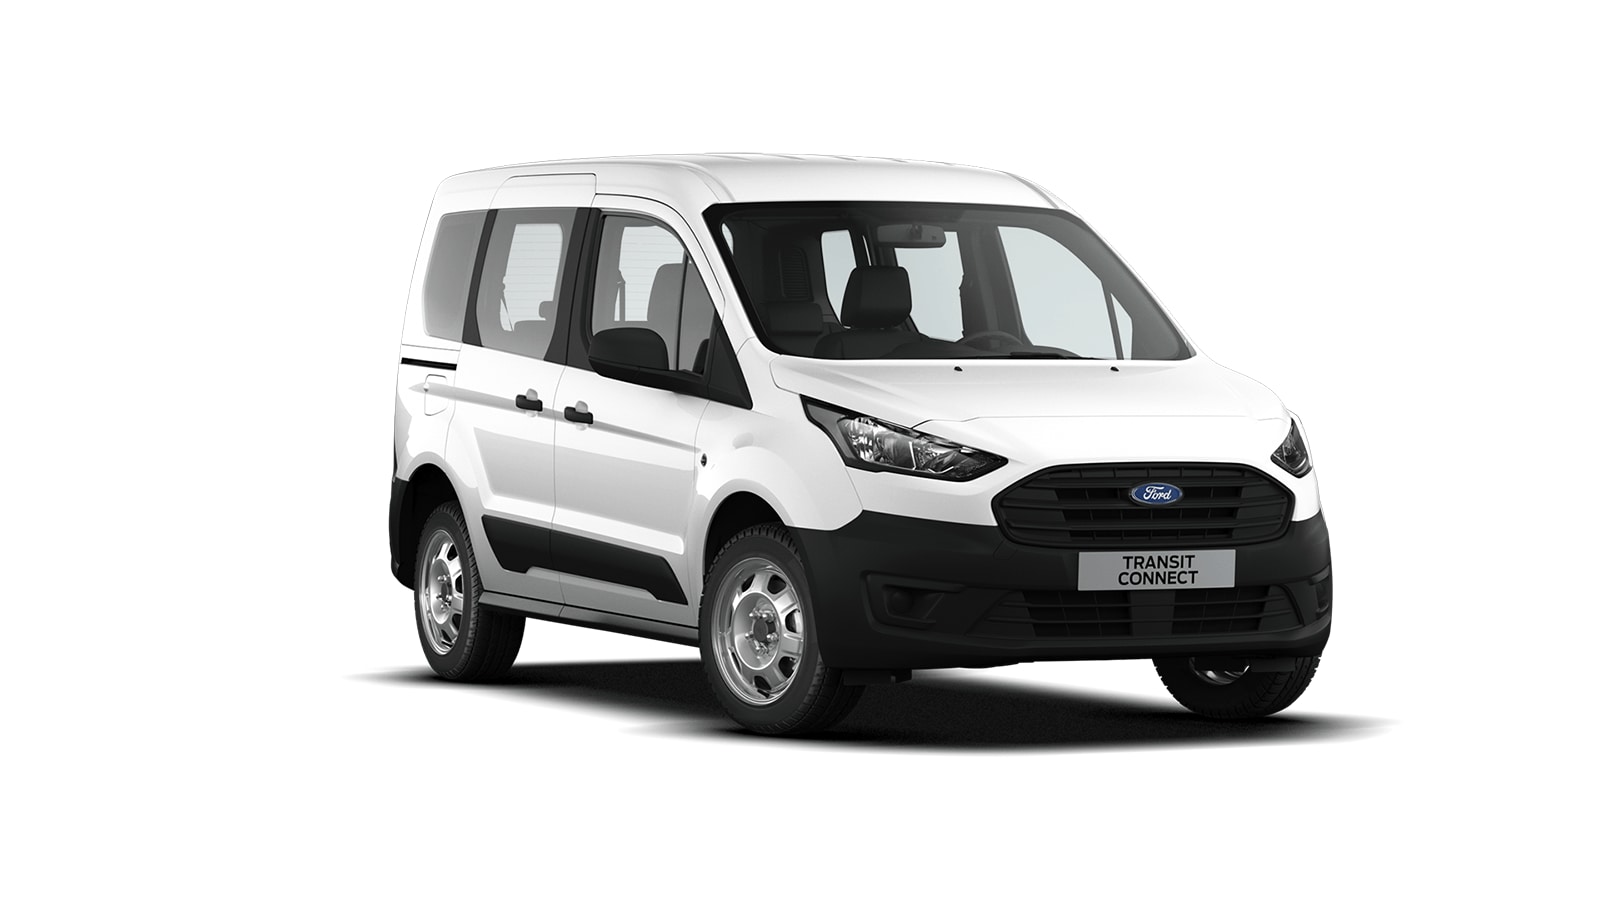 Ford Transit Double Cab in Van